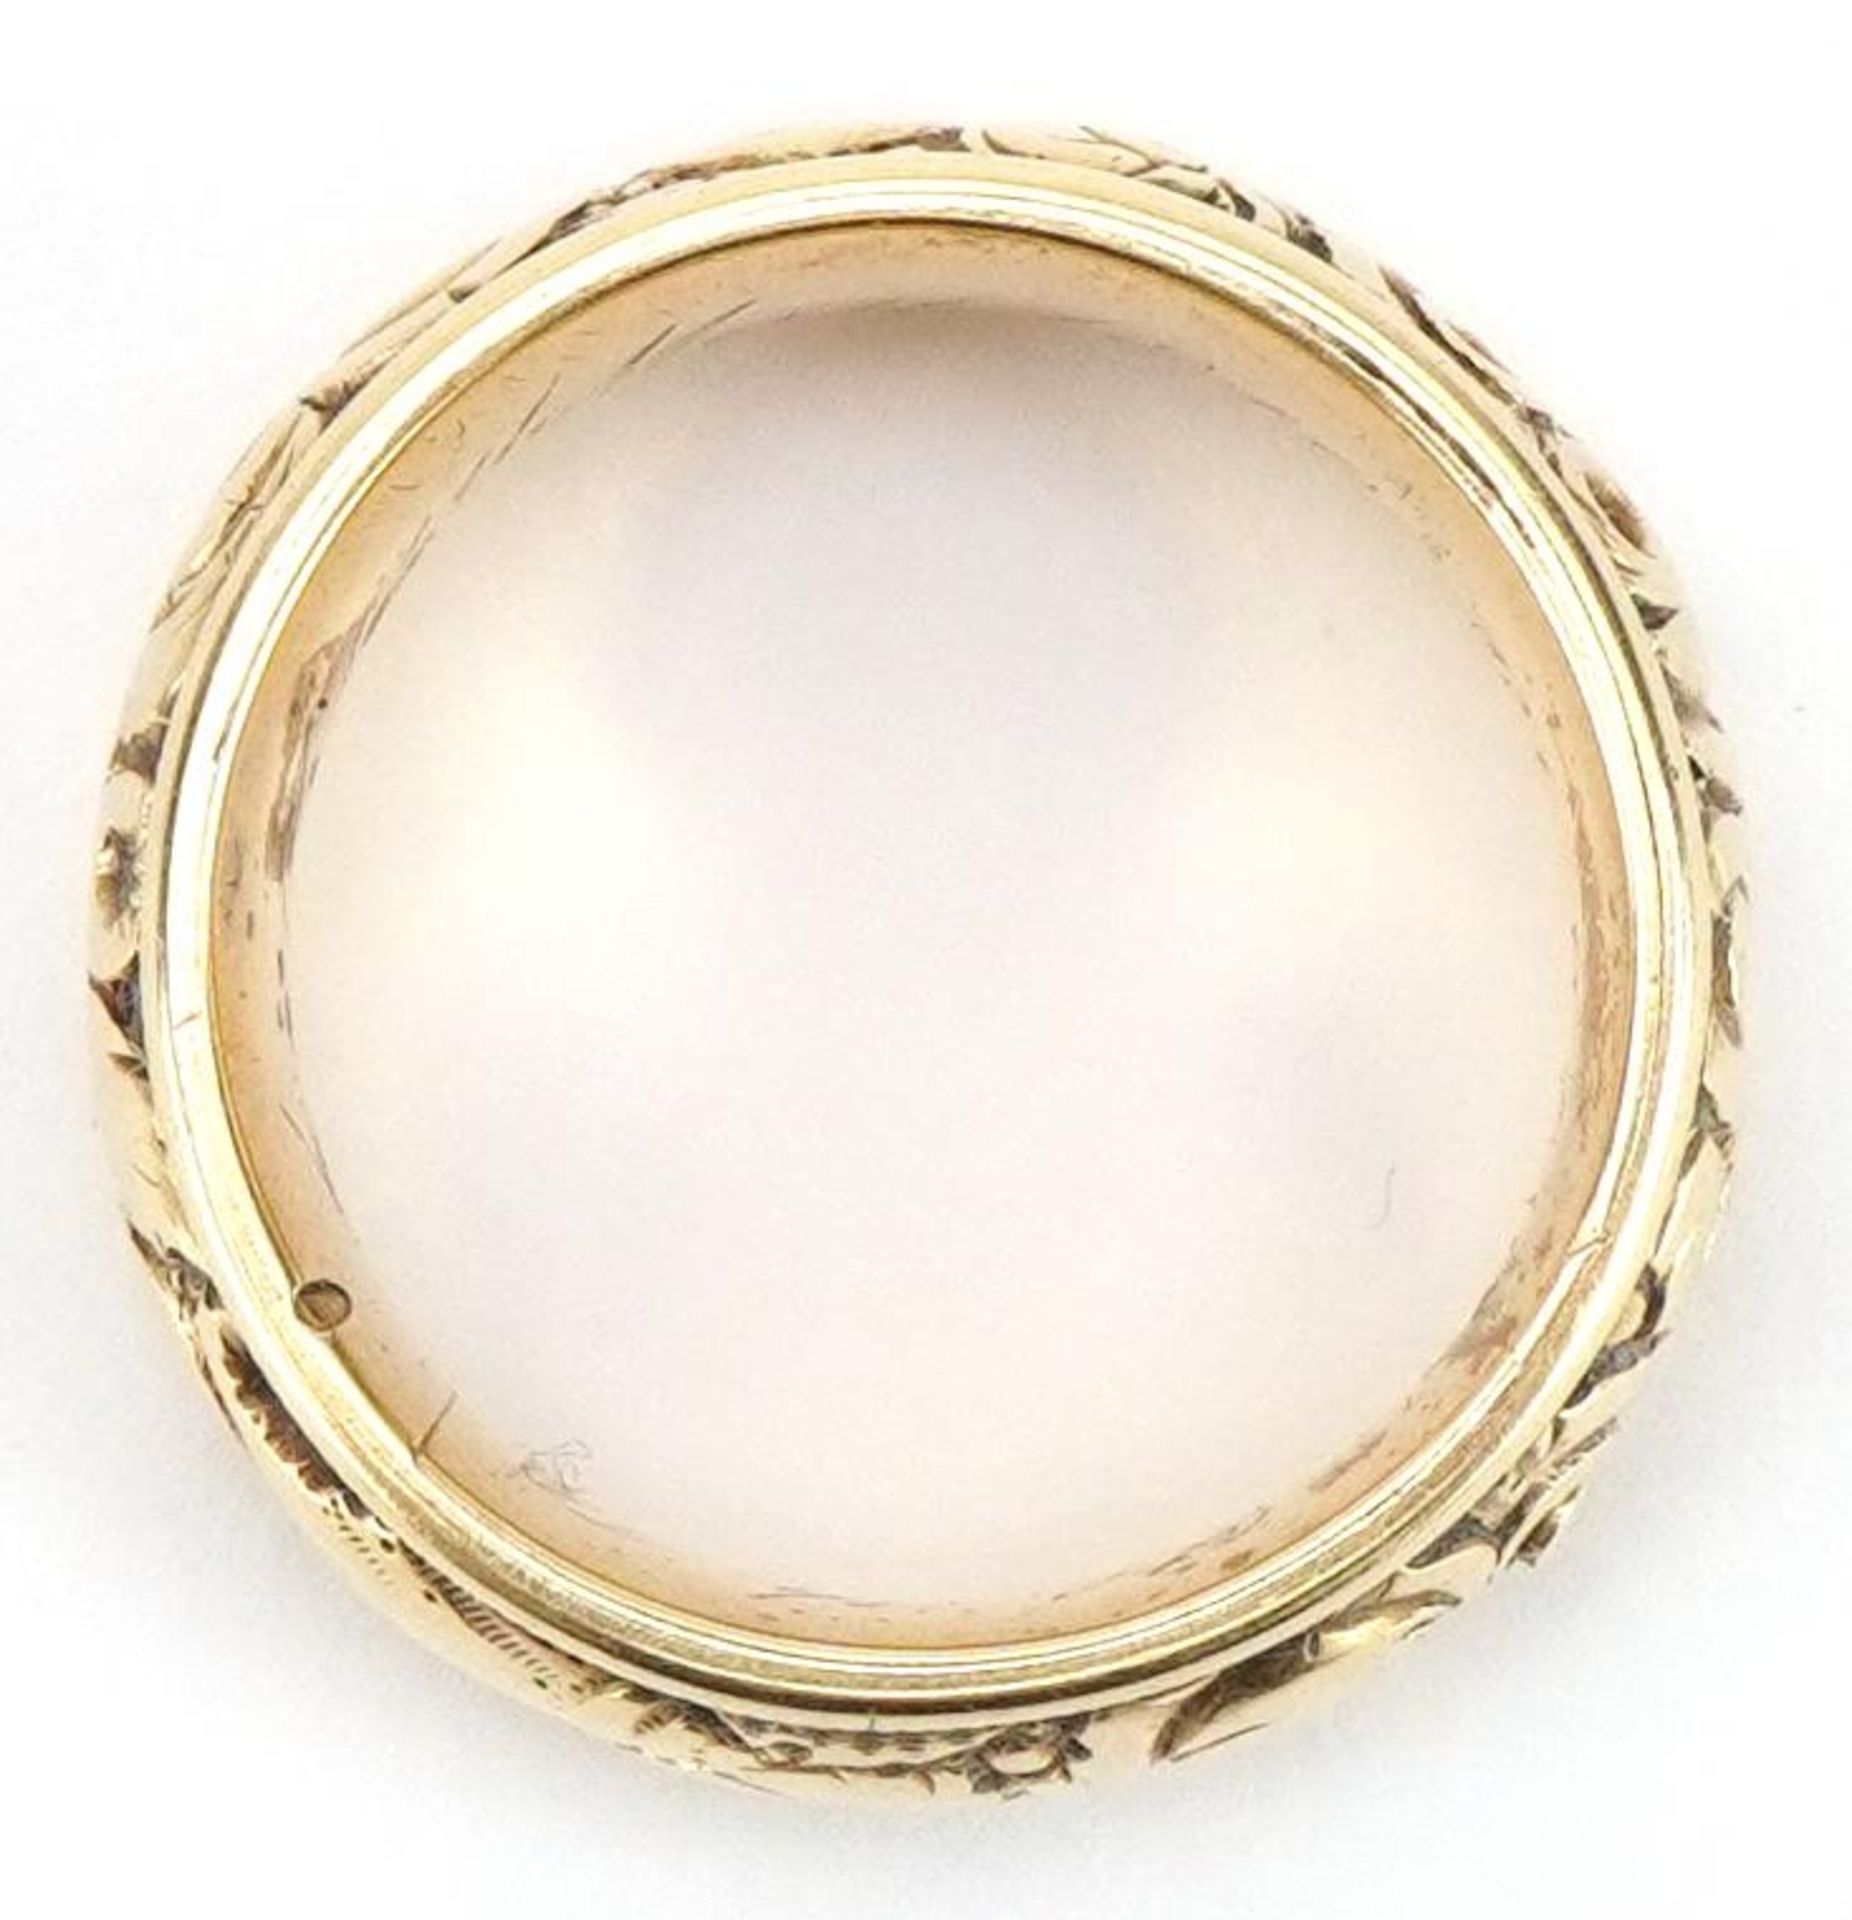 Georgian unmarked gold repousse band mourning ring with hidden locket compartment, tests as 22ct - Image 5 of 8